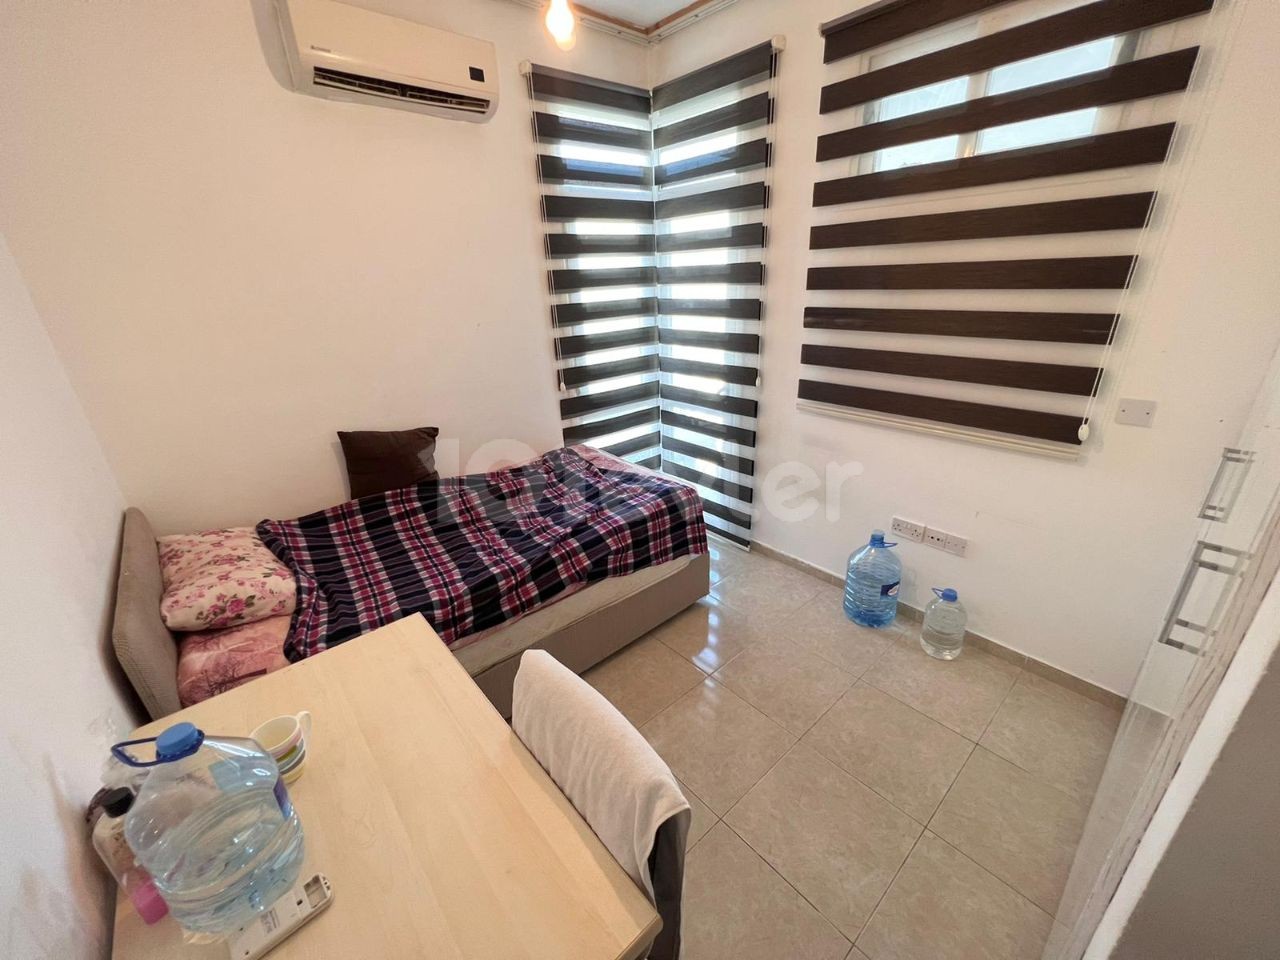 A 3-Bedroom Apartment for Sale Suitable for Investment, Located Close to the State Hospital in the Ortakoy District of Nicosia ** 